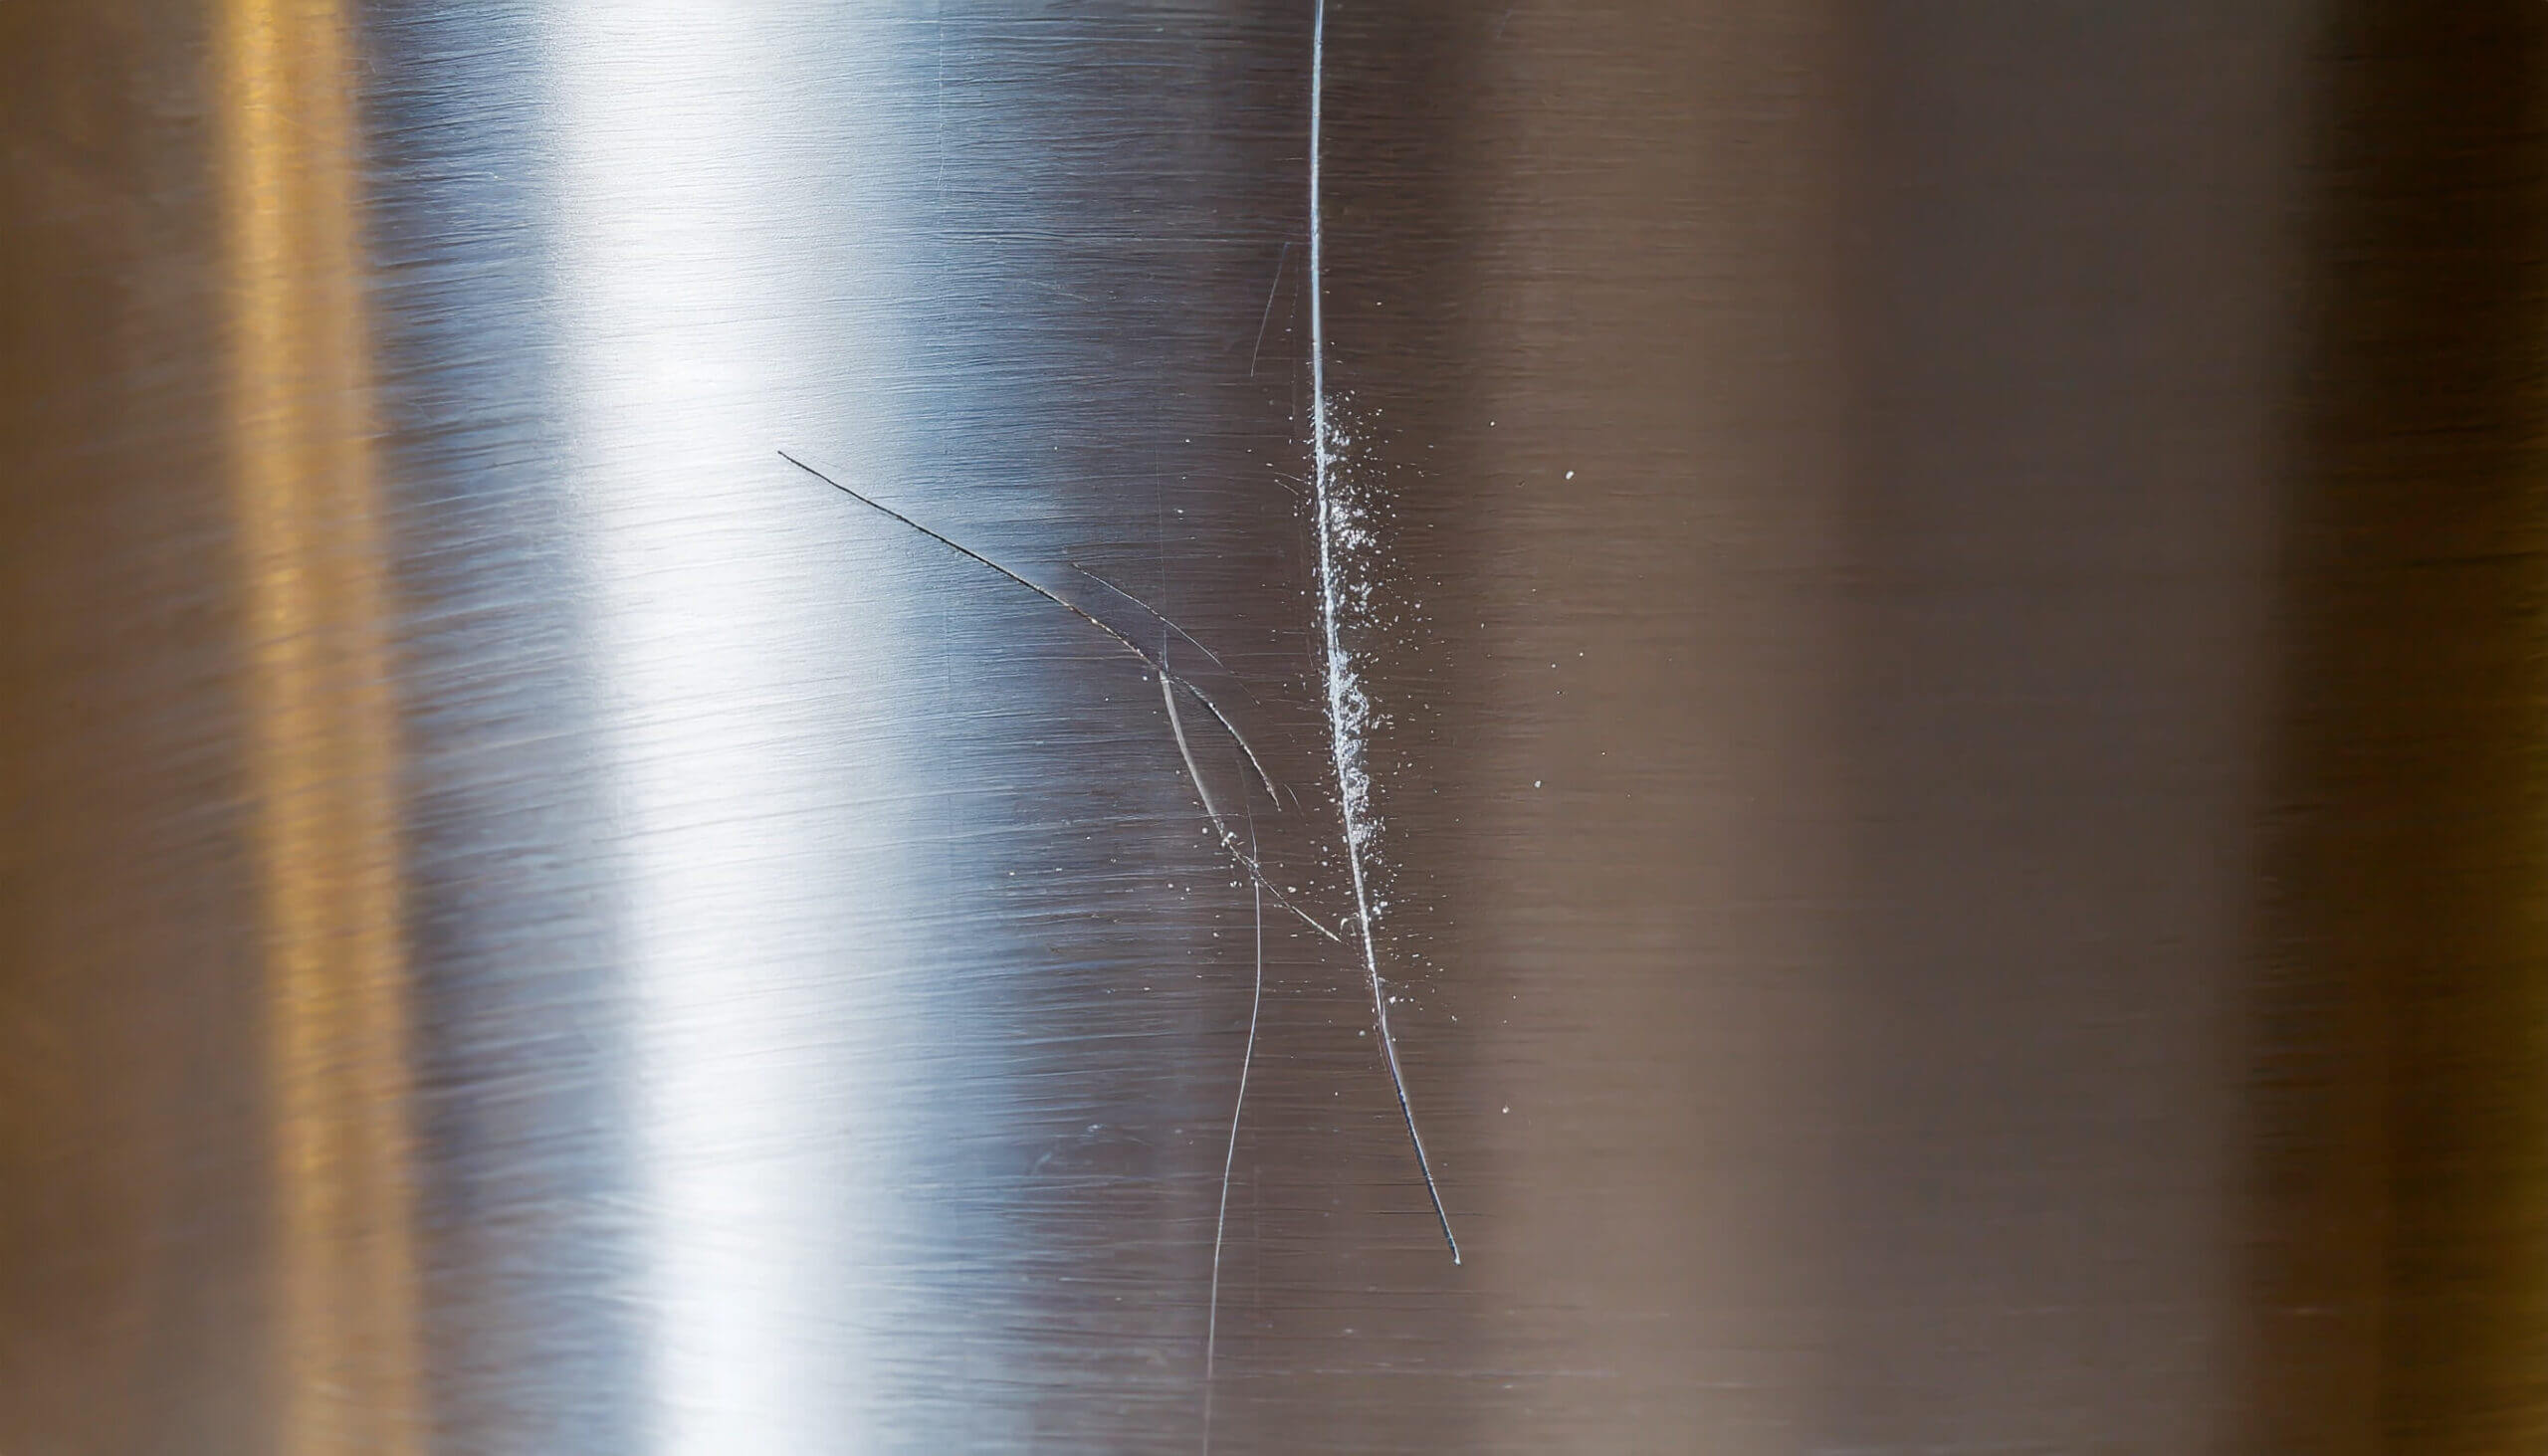 How To Remove Scratches From Stainless Steel - A Complete Guide